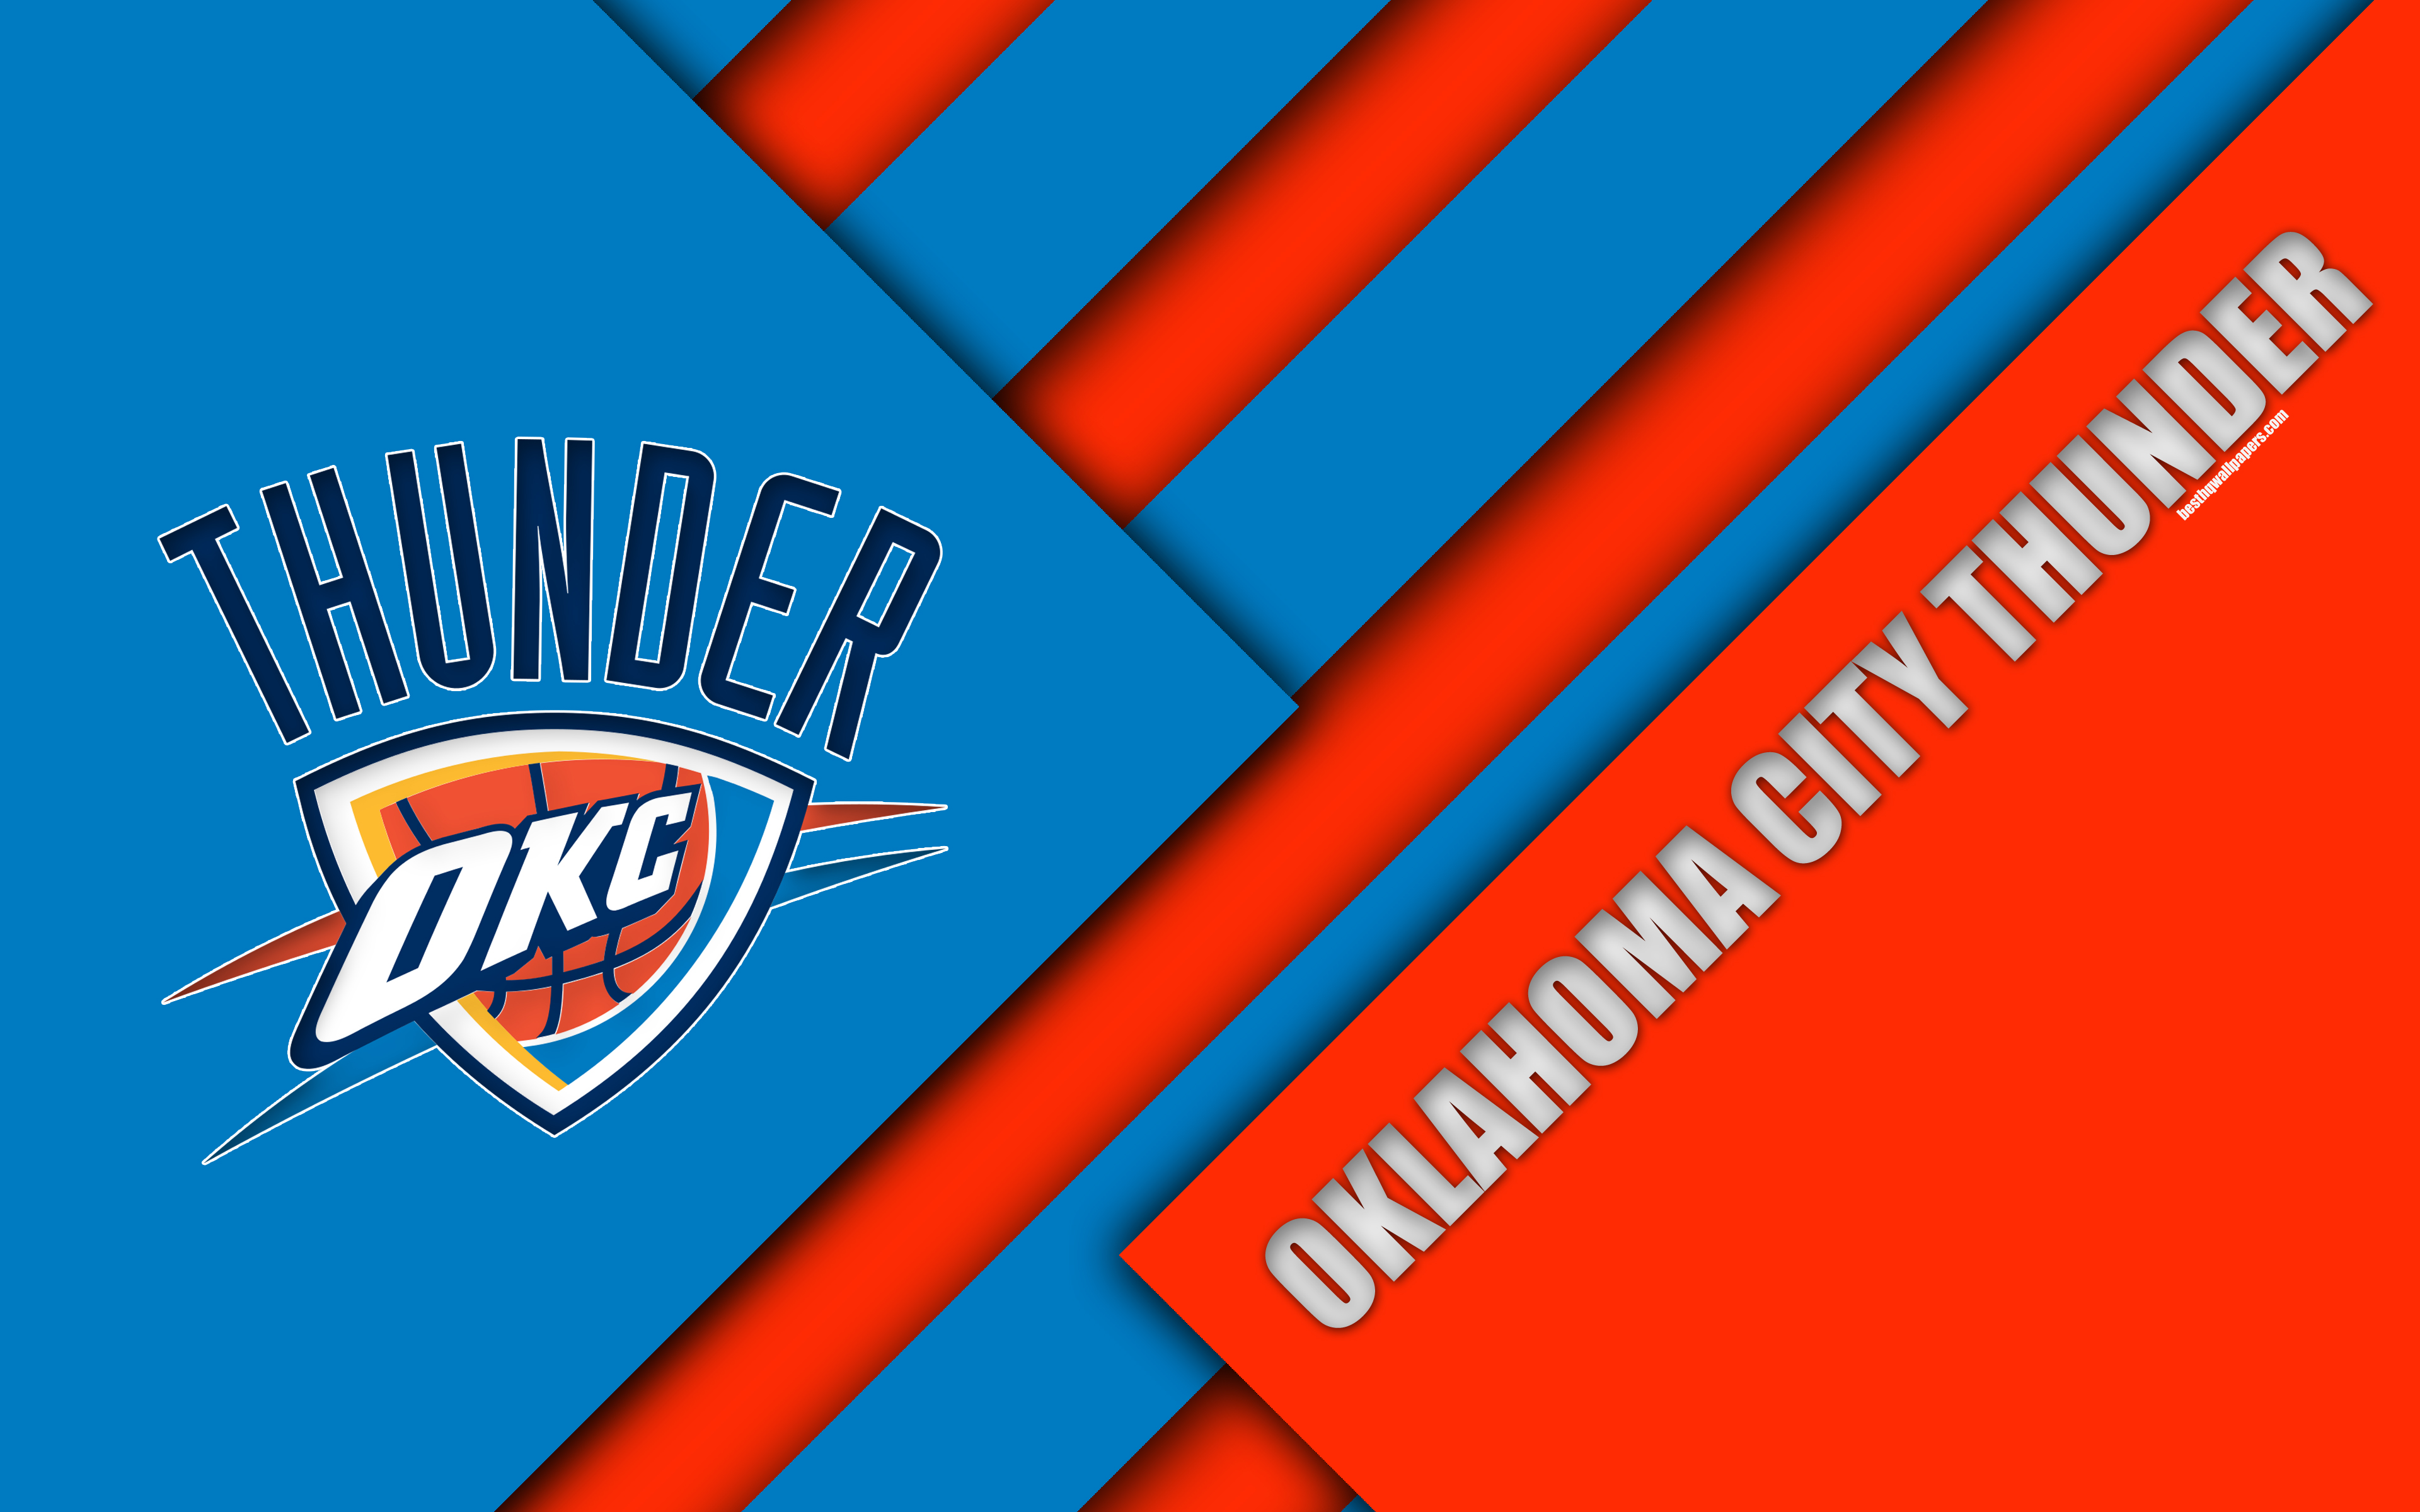 Download wallpaper Oklahoma City Thunder, NBA, 4k, logo, material design, American basketball club, Orange blue abstraction, Oklahoma City, Oklahoma, USA, basketball for desktop with resolution 3840x2400. High Quality HD picture wallpaper